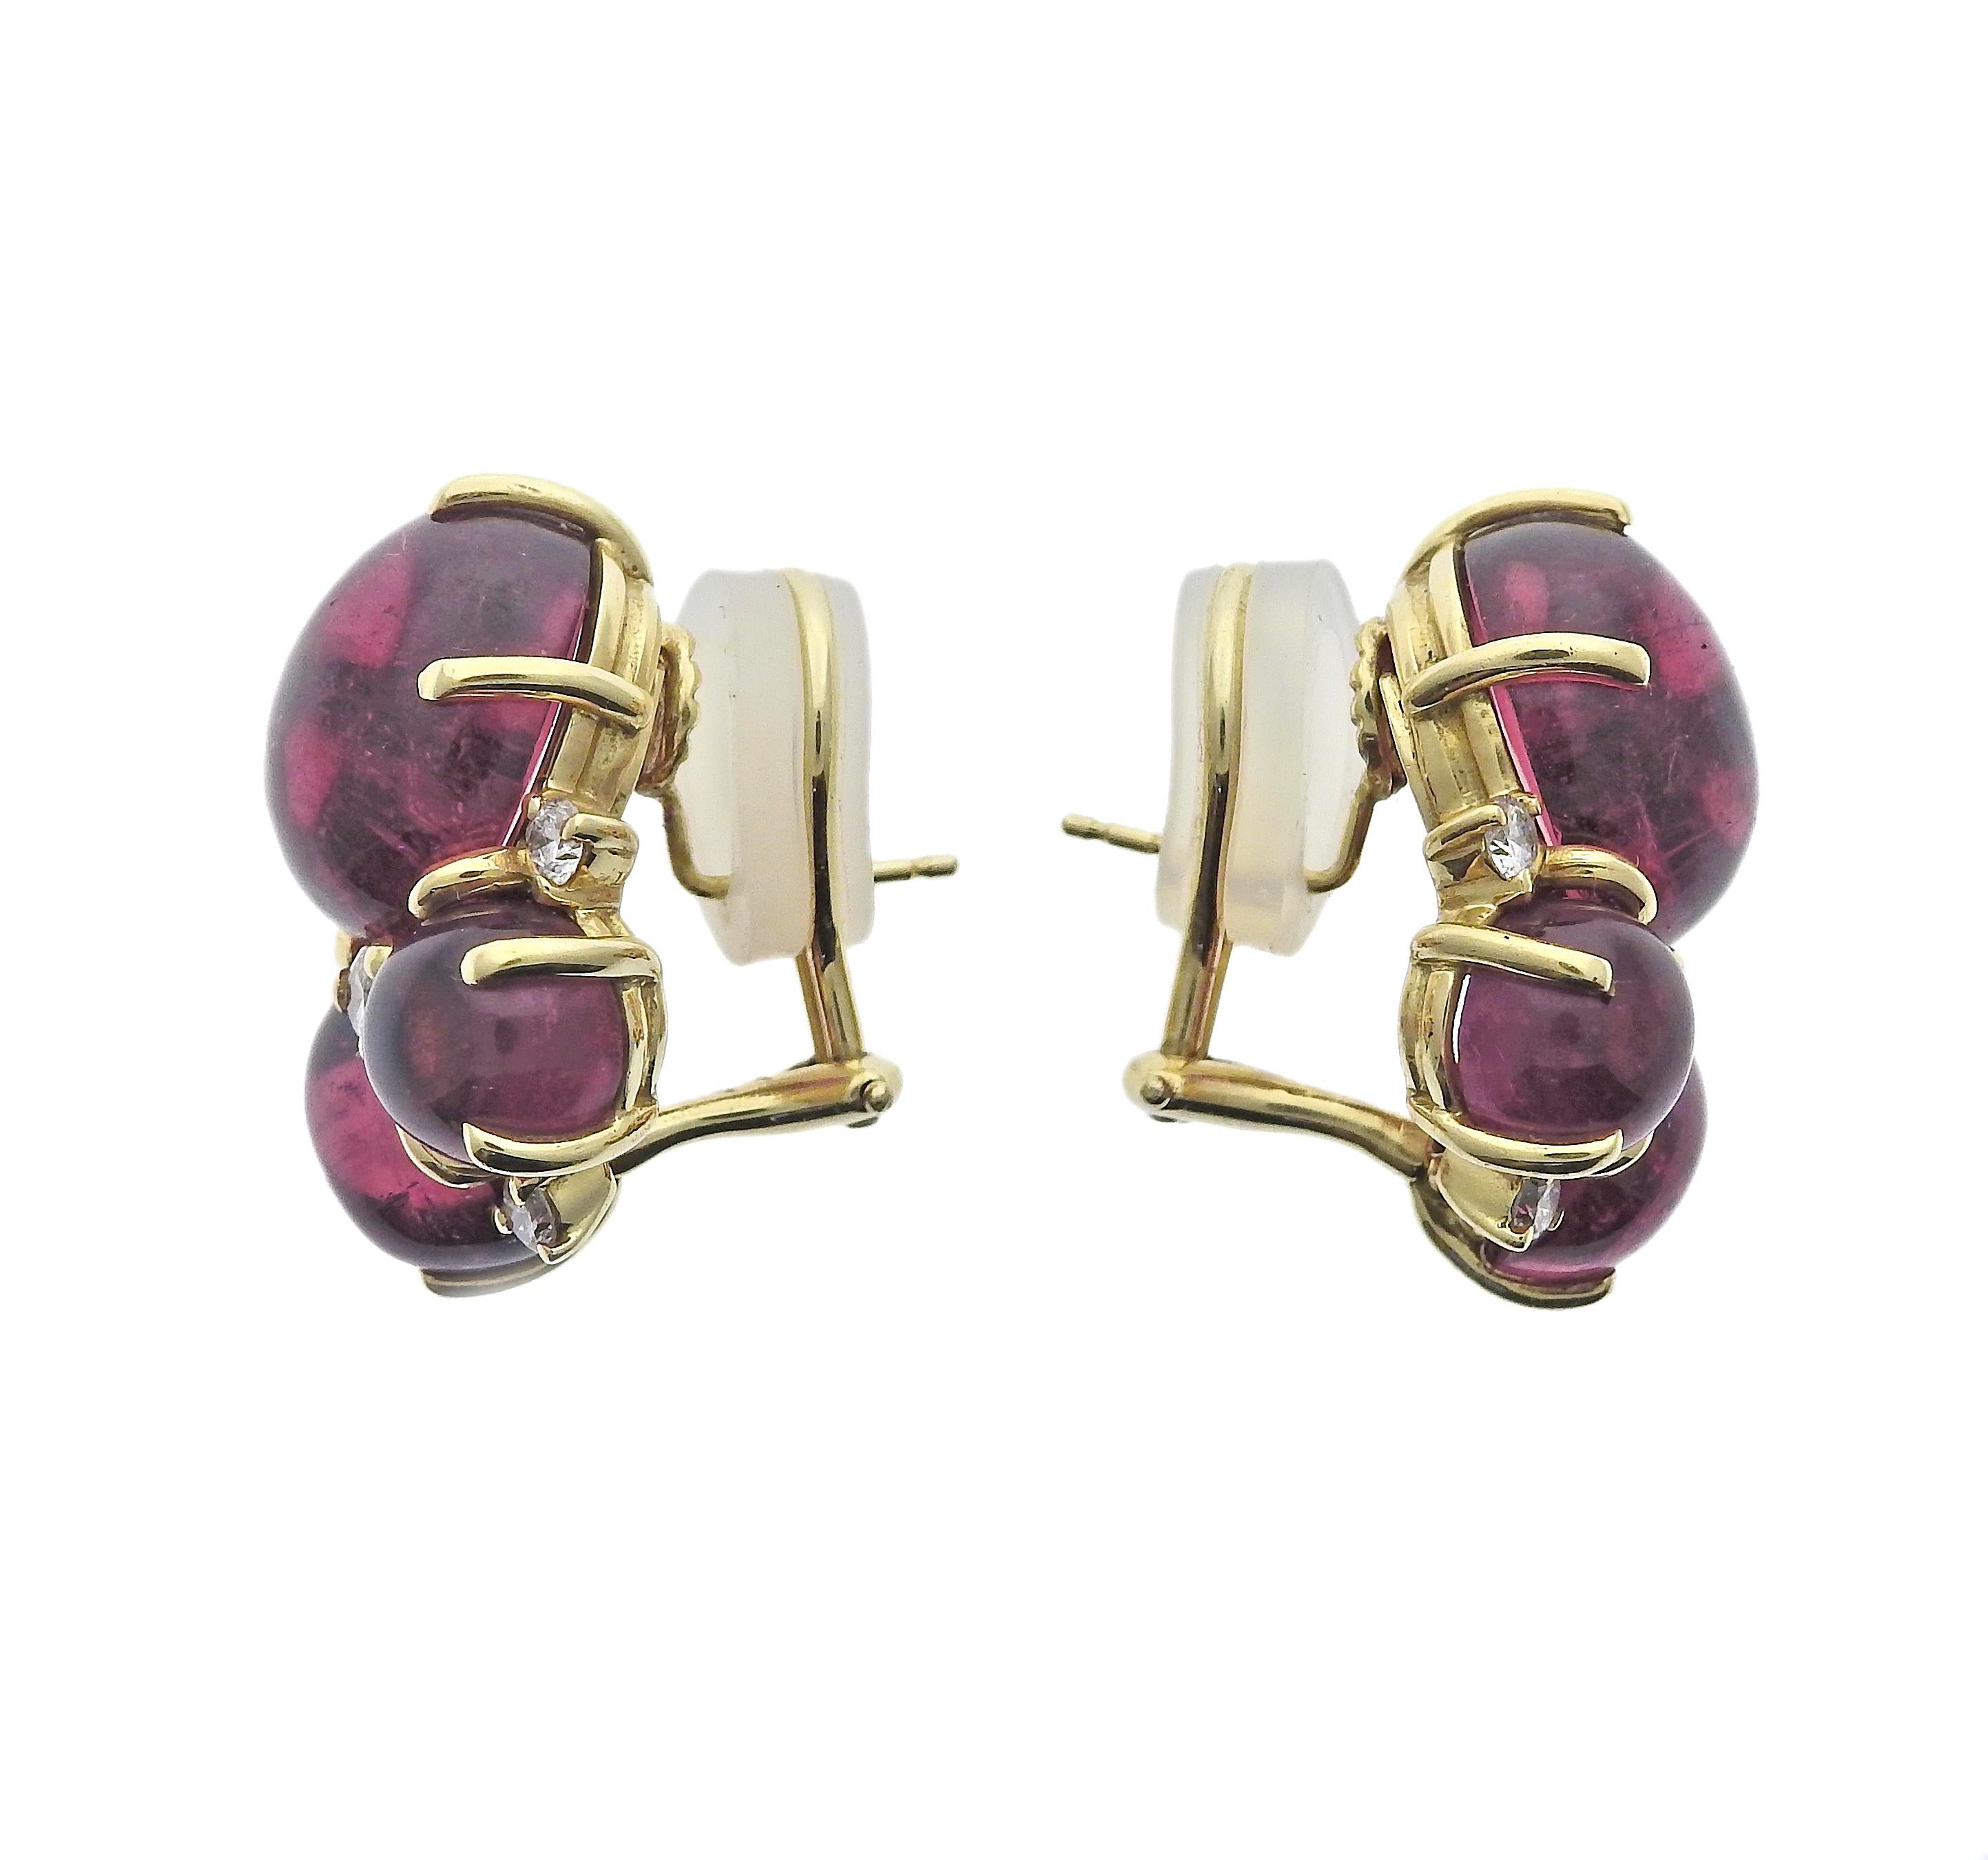 Seaman Schepps 18K yellow gold earrings set with cabochon pink tourmaline and 0.50ctw in VS/H diamonds. Earrings measure 24mm x 19mm. Marked: 750, Shell Hallmark, Seaman Schepps, Serial Number. Weight is 19.6 grams.